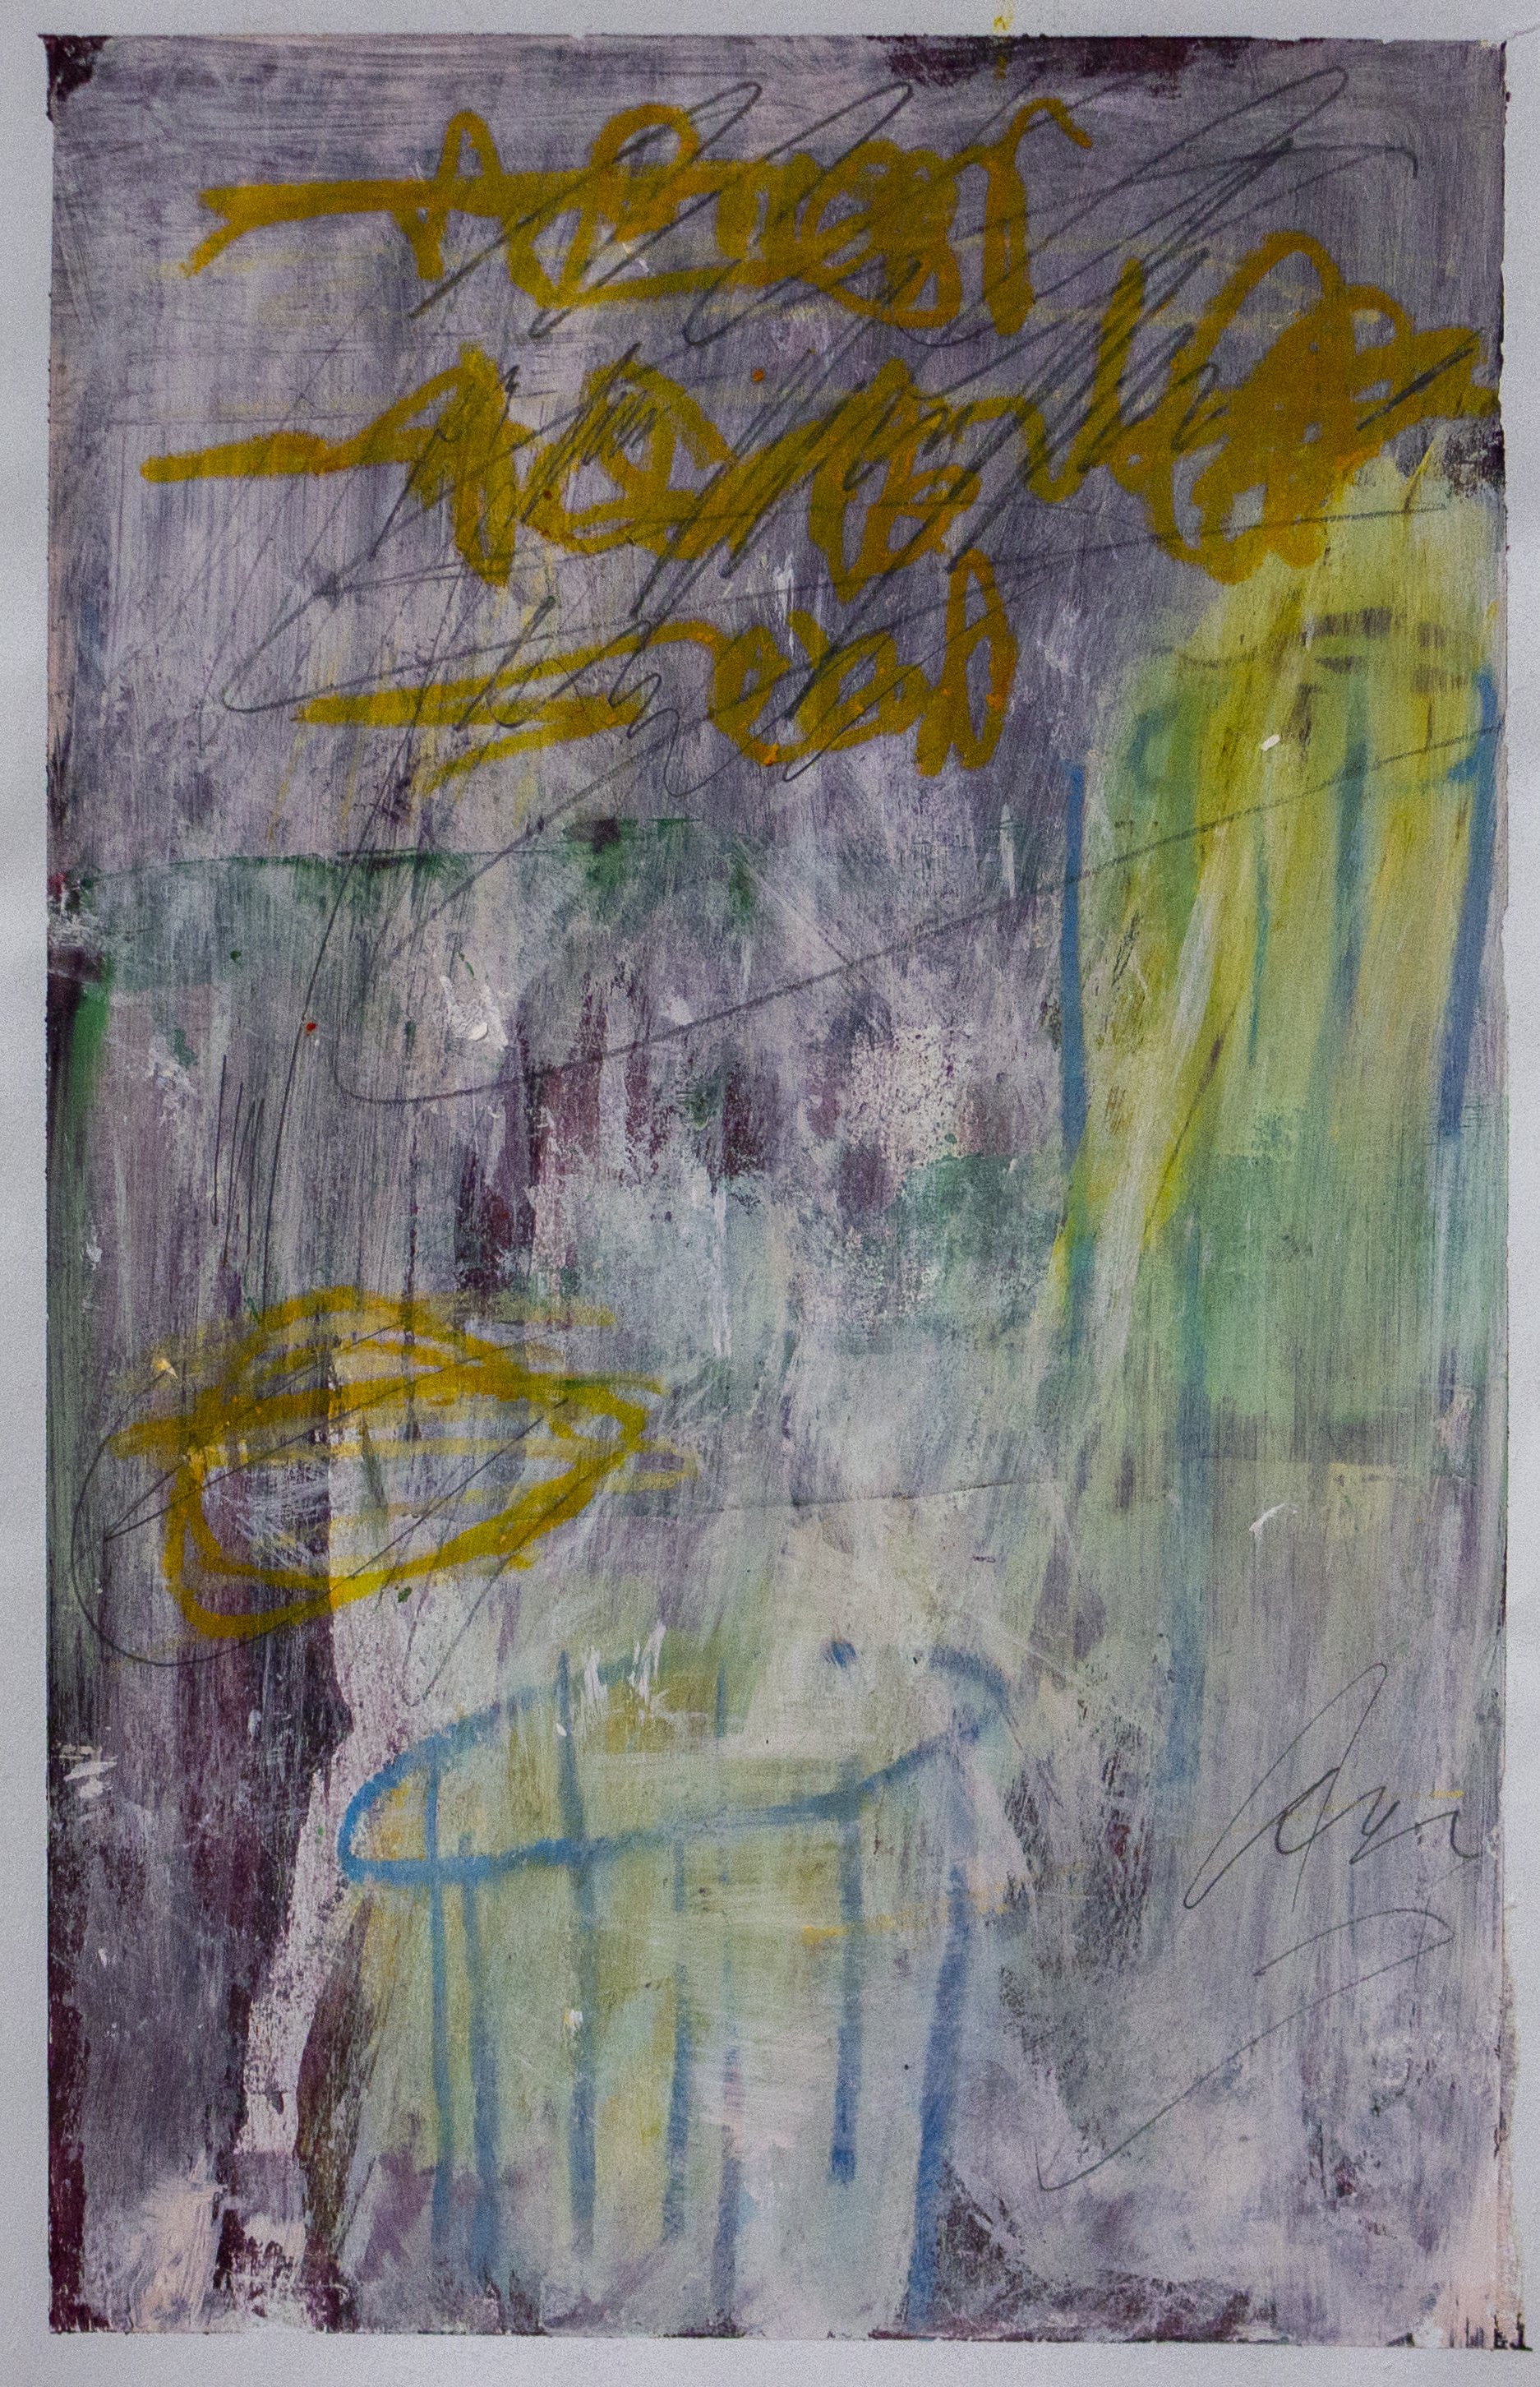   Dive: Low Lights and Low Expectations , 2021  11 x 17 inches  Acrylic, Crayon, Pastel and Pencil on Paper 